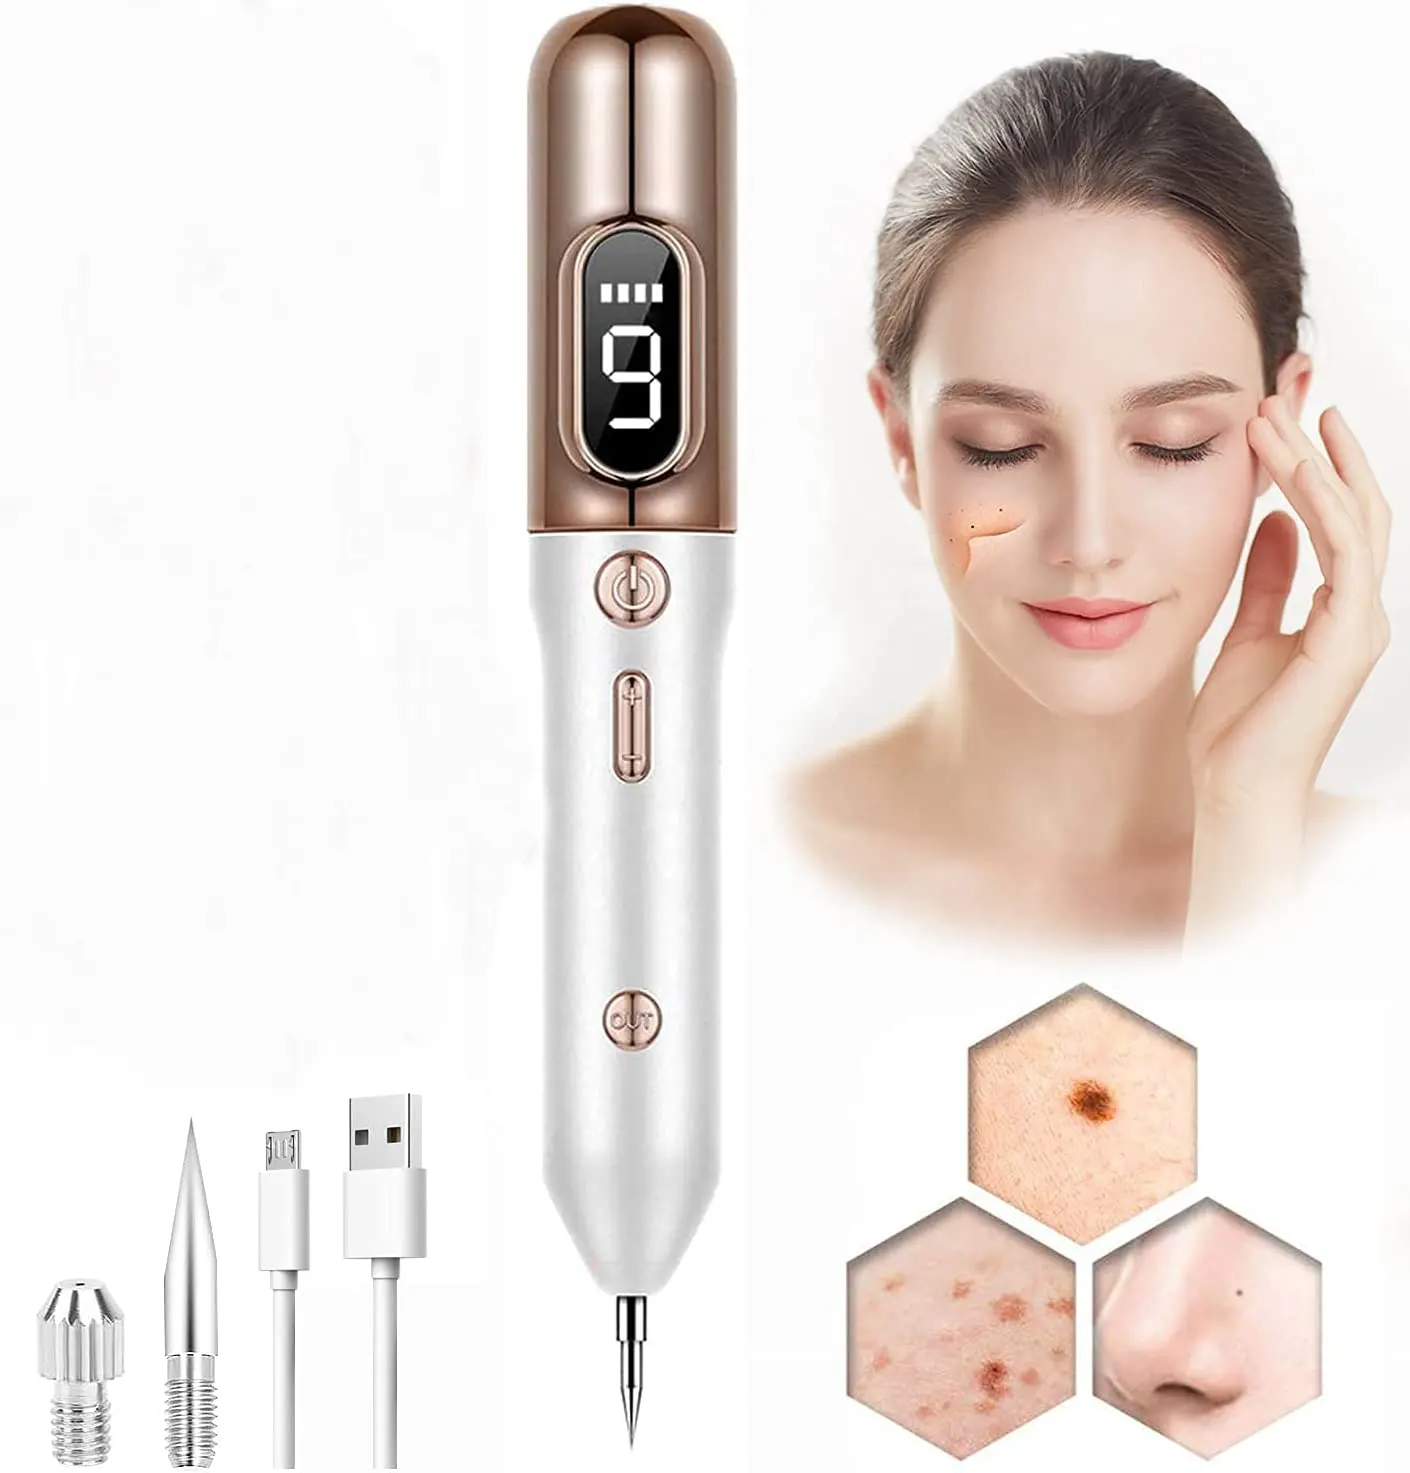 Skin Tag Remover, Skin Tag Removal Kit Tools with Home Usage USB Charging